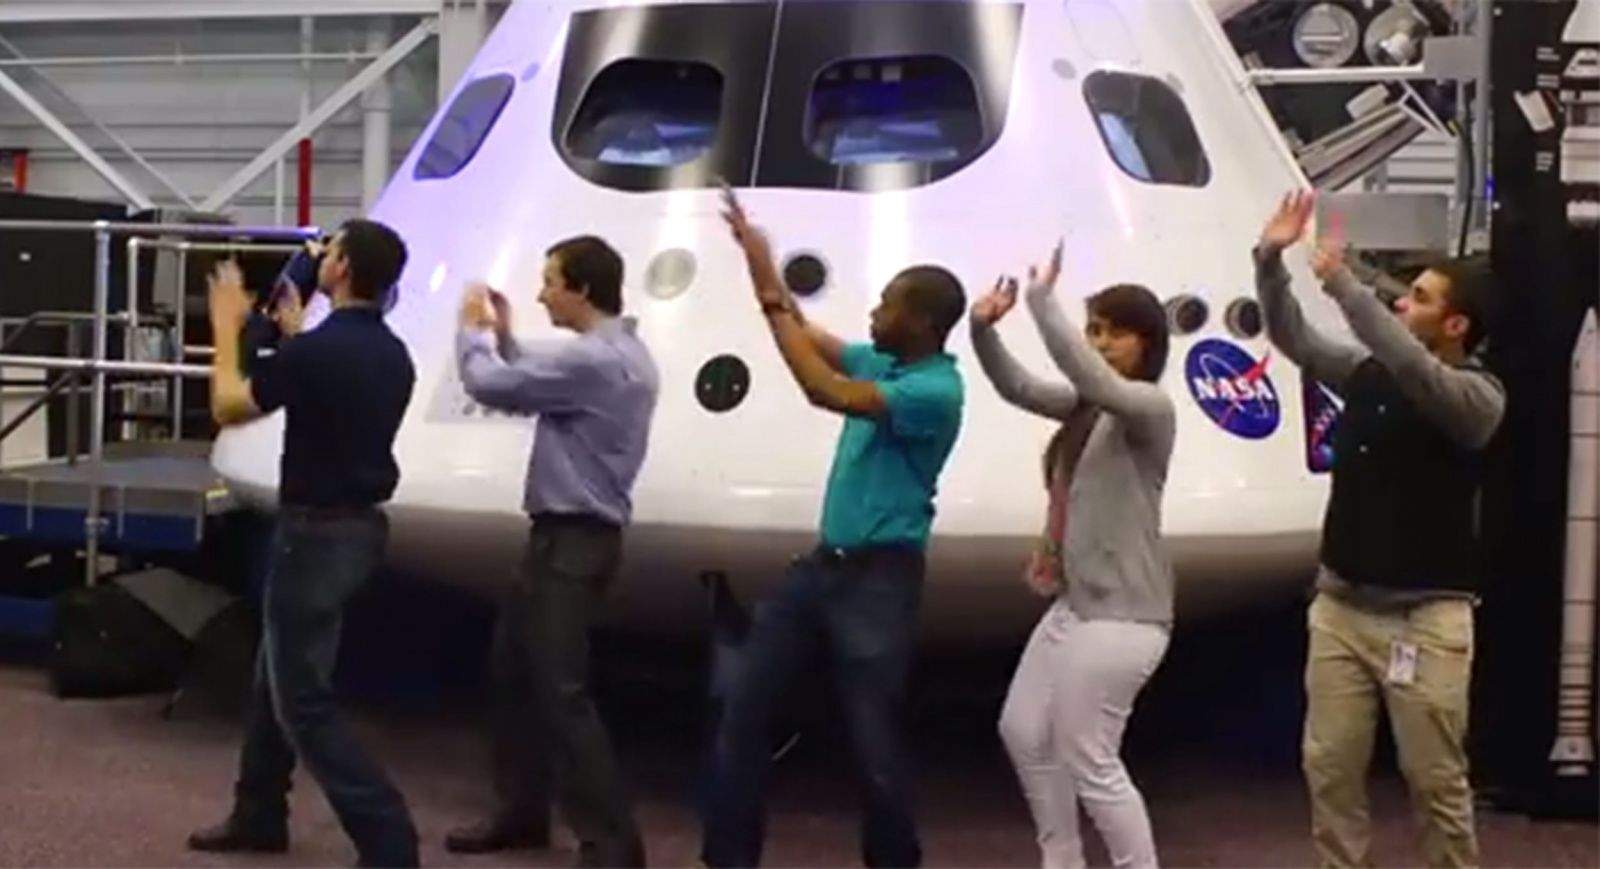 A dance line of NASA interns from a scene in their parody music video called 